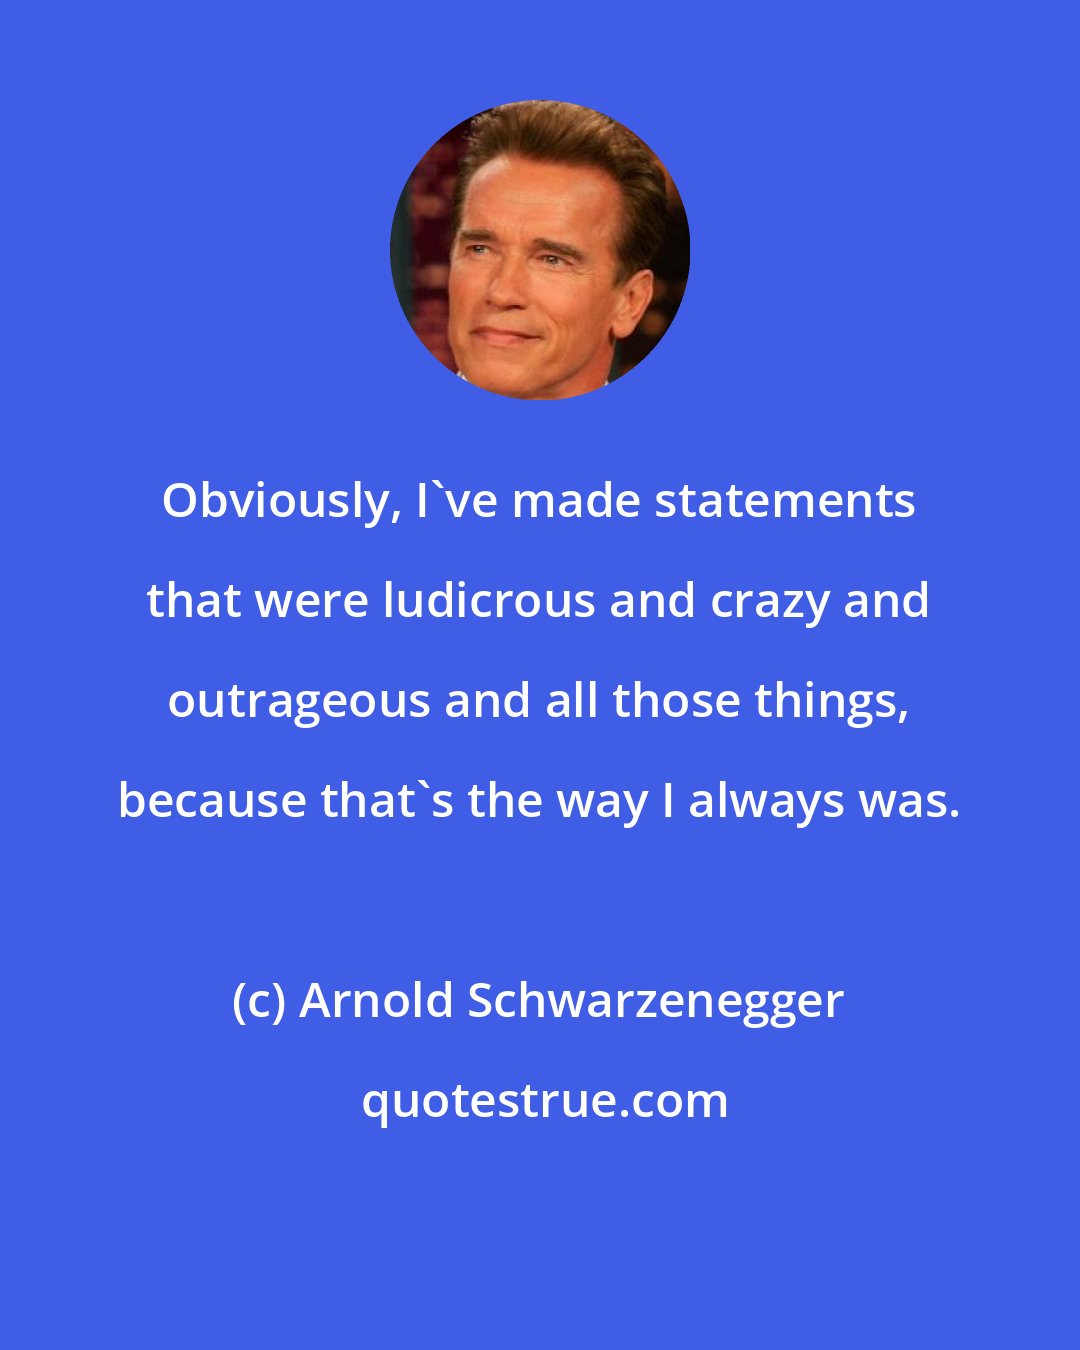 Arnold Schwarzenegger: Obviously, I've made statements that were ludicrous and crazy and outrageous and all those things, because that's the way I always was.